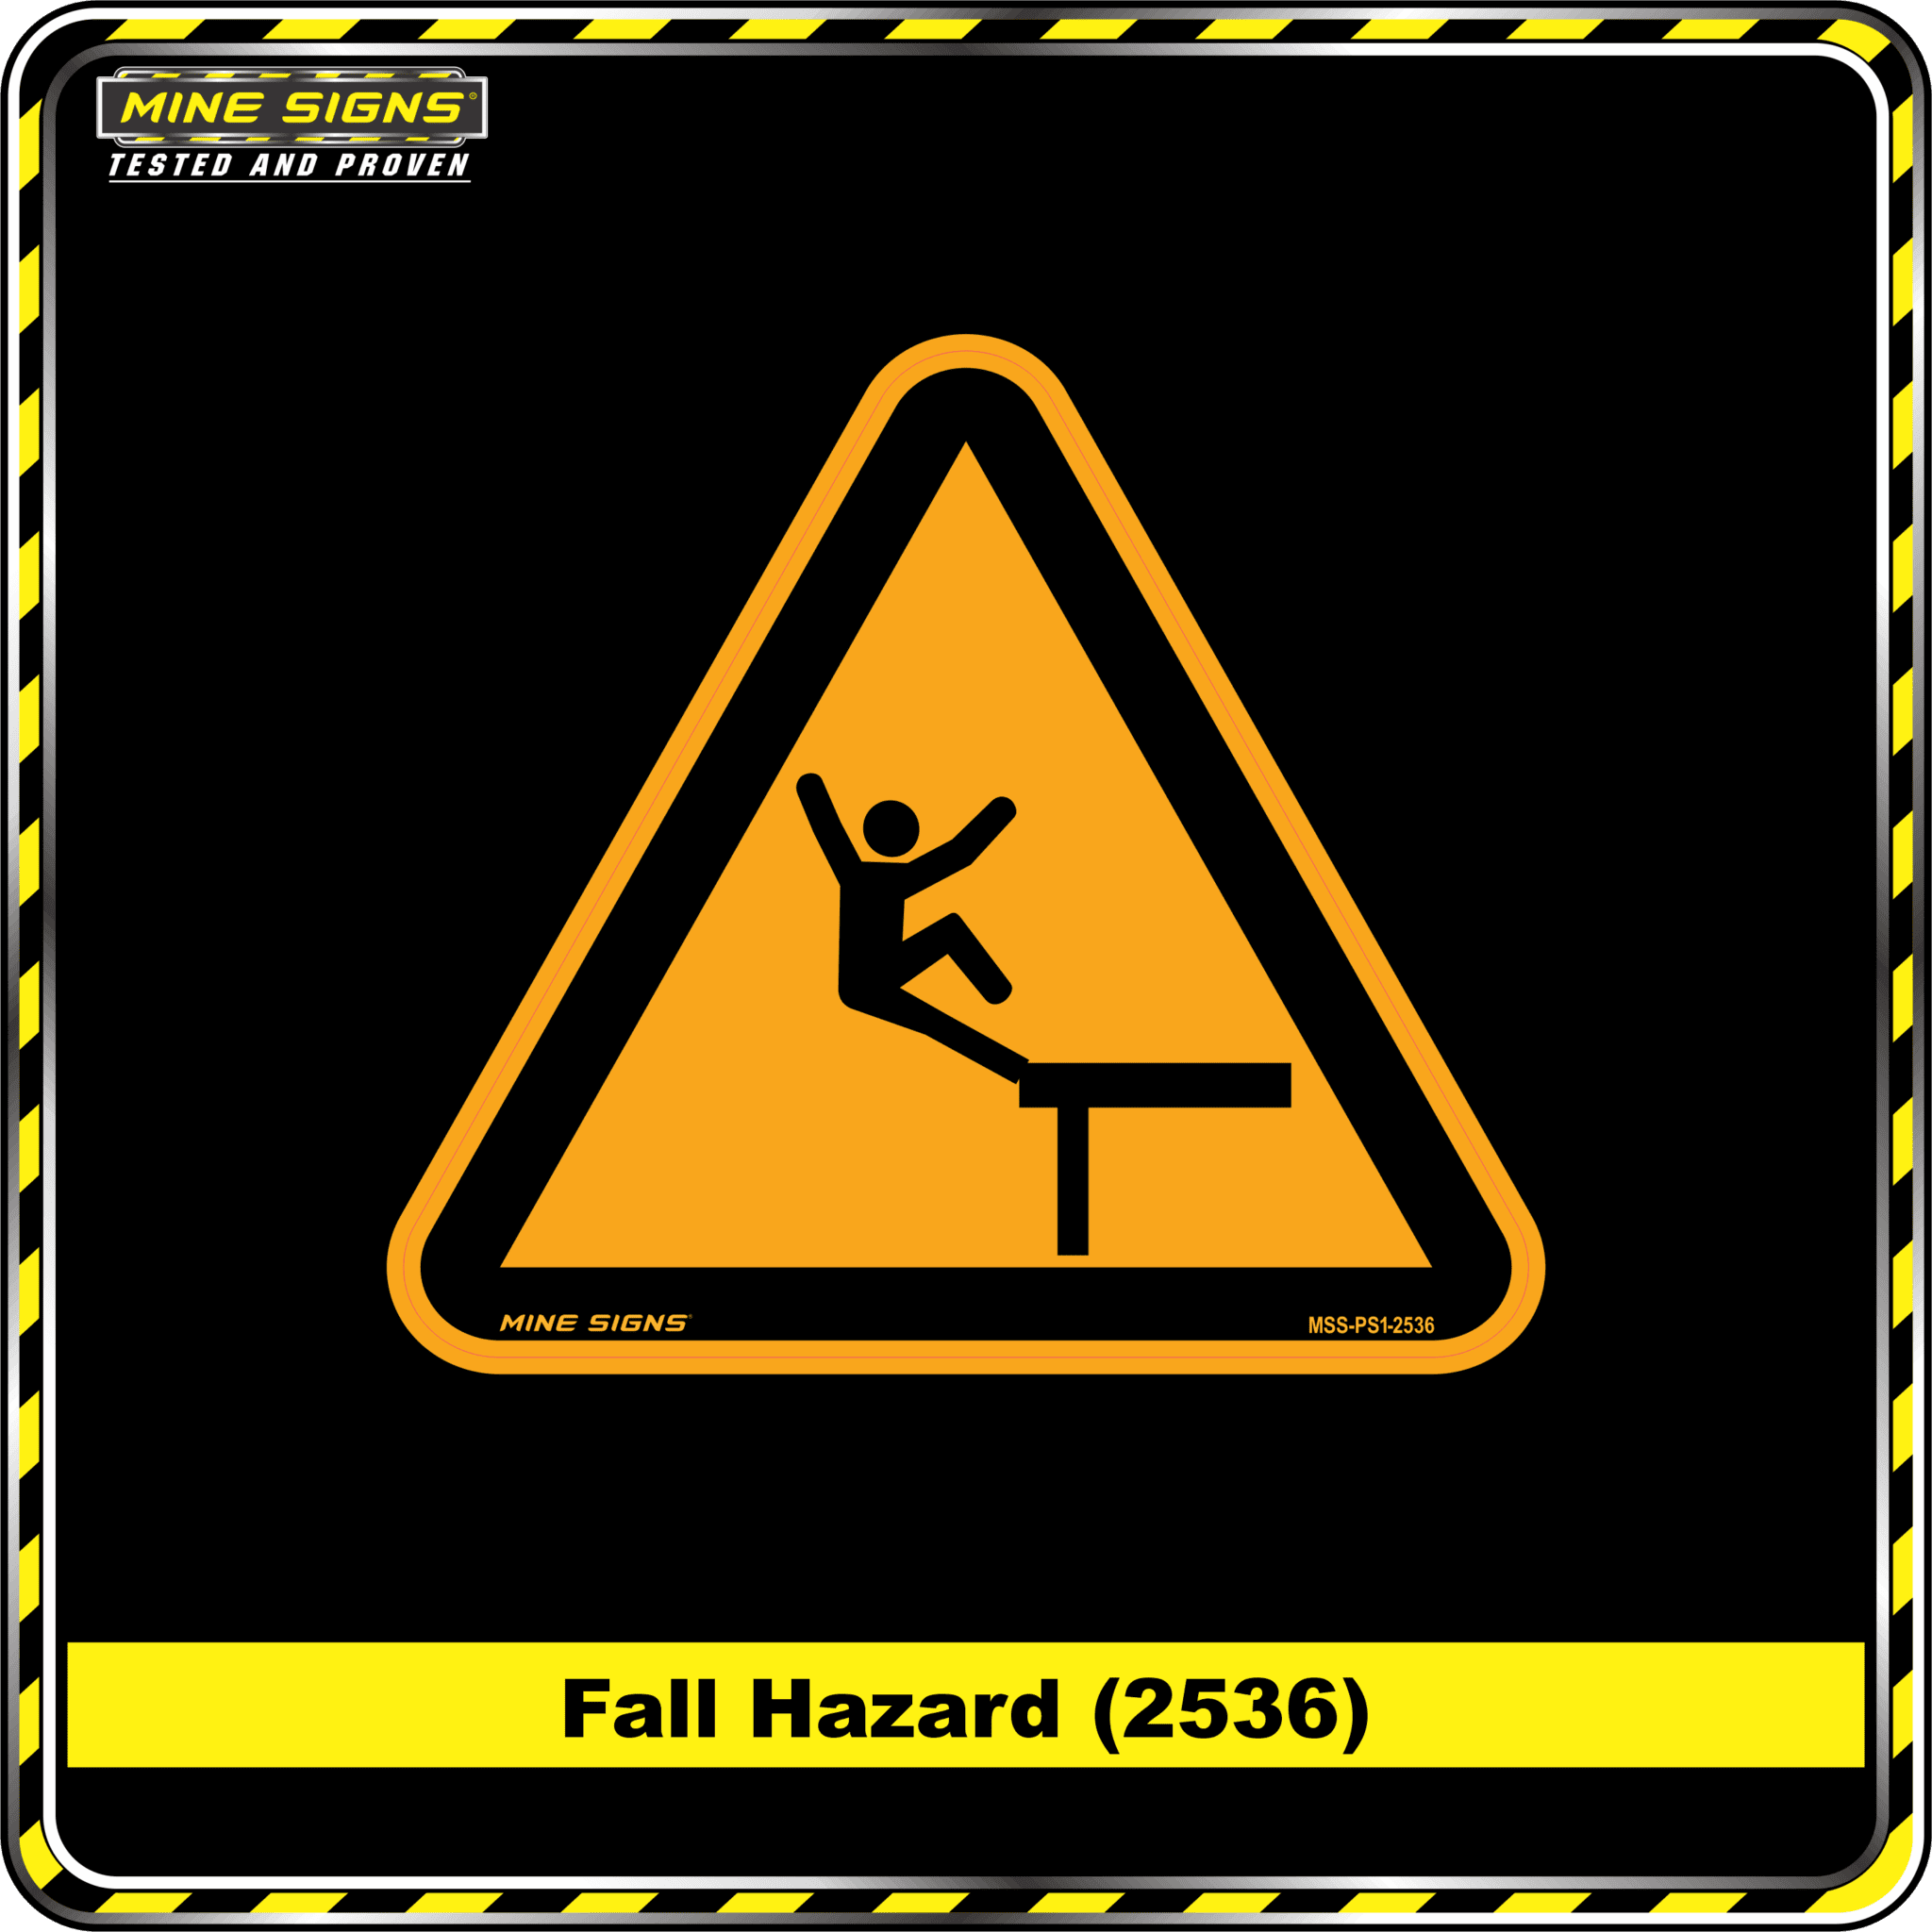 MS - Product Background - Safety Signs - Fall Hazard 2536